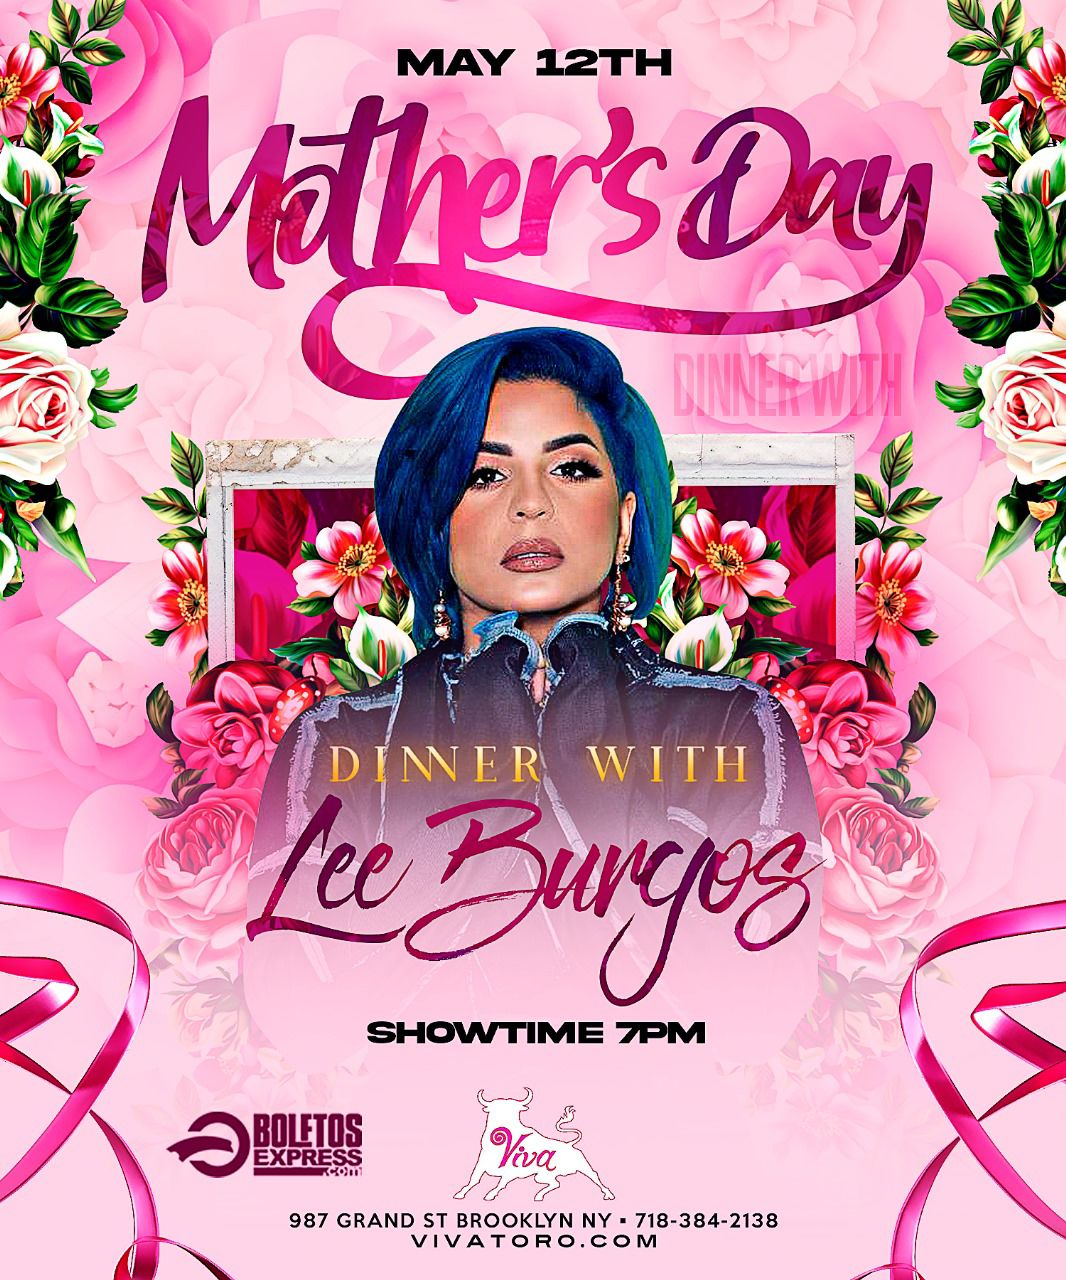 Lee Burgos “Mothers Day Special”